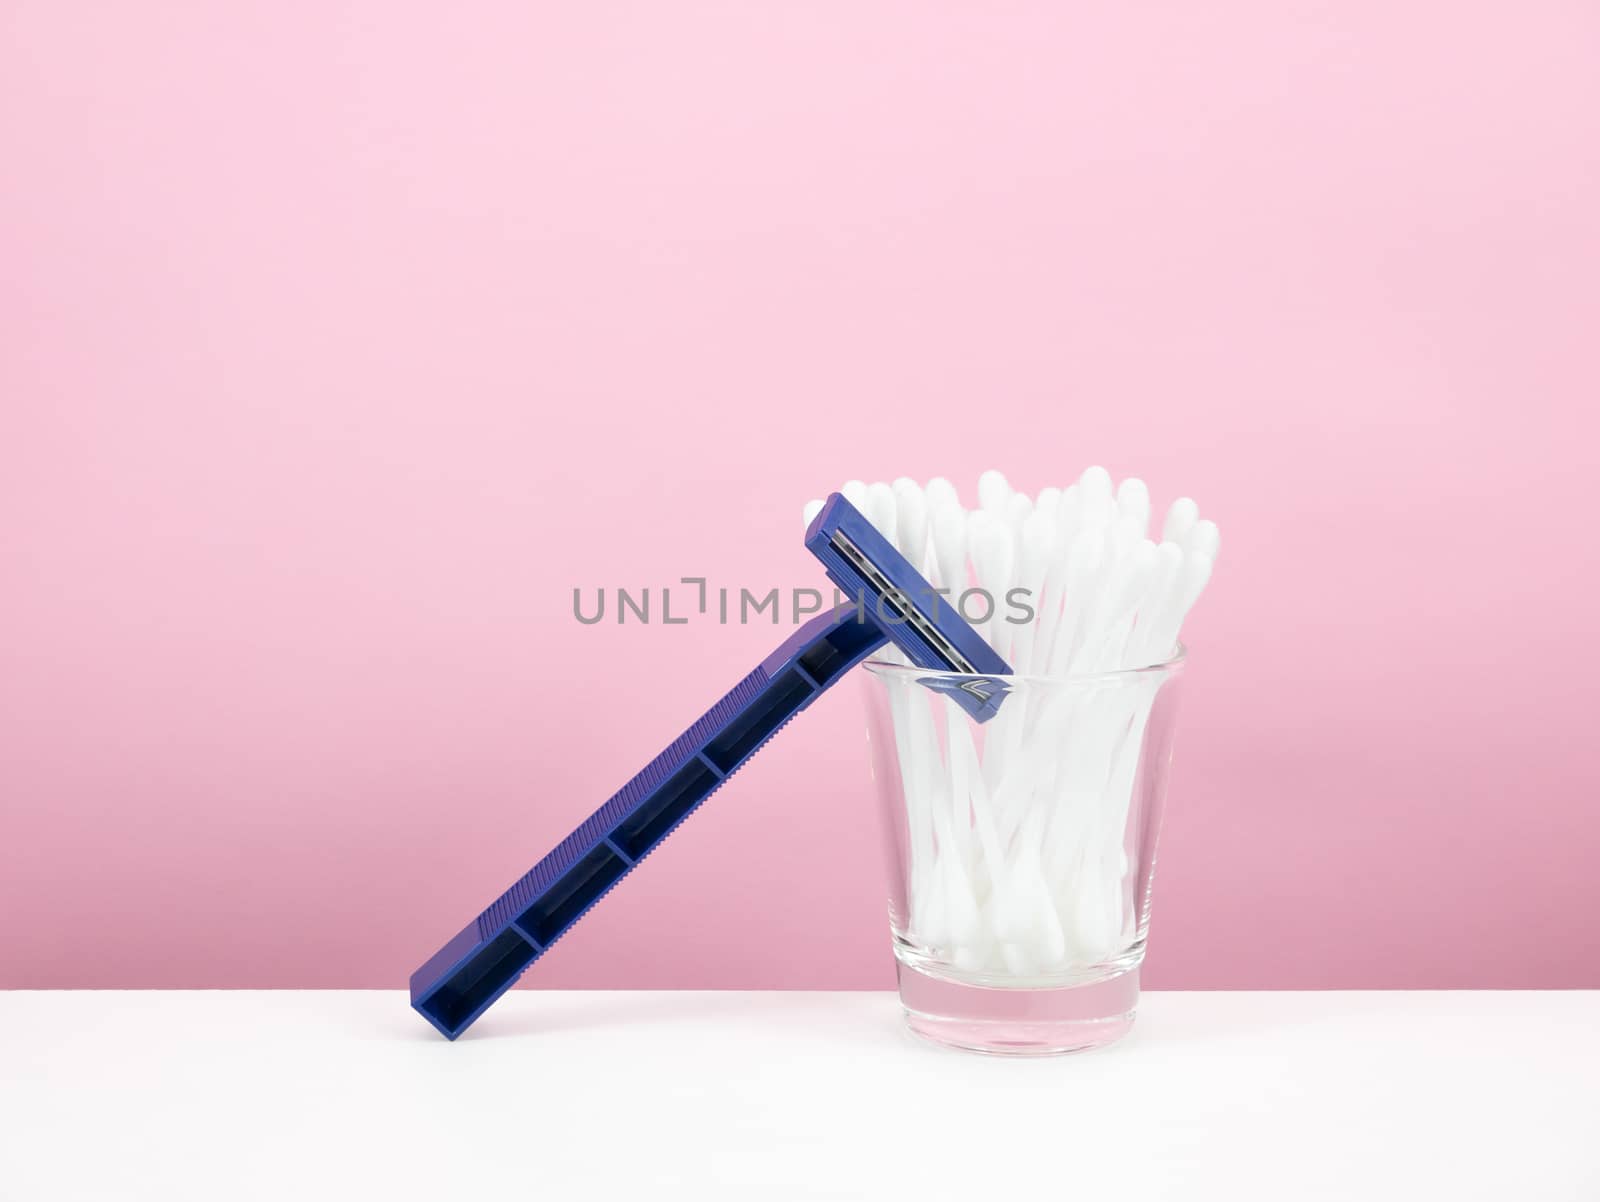 The group of purified white cotton buds in shot glass and dark blue plastic razor.